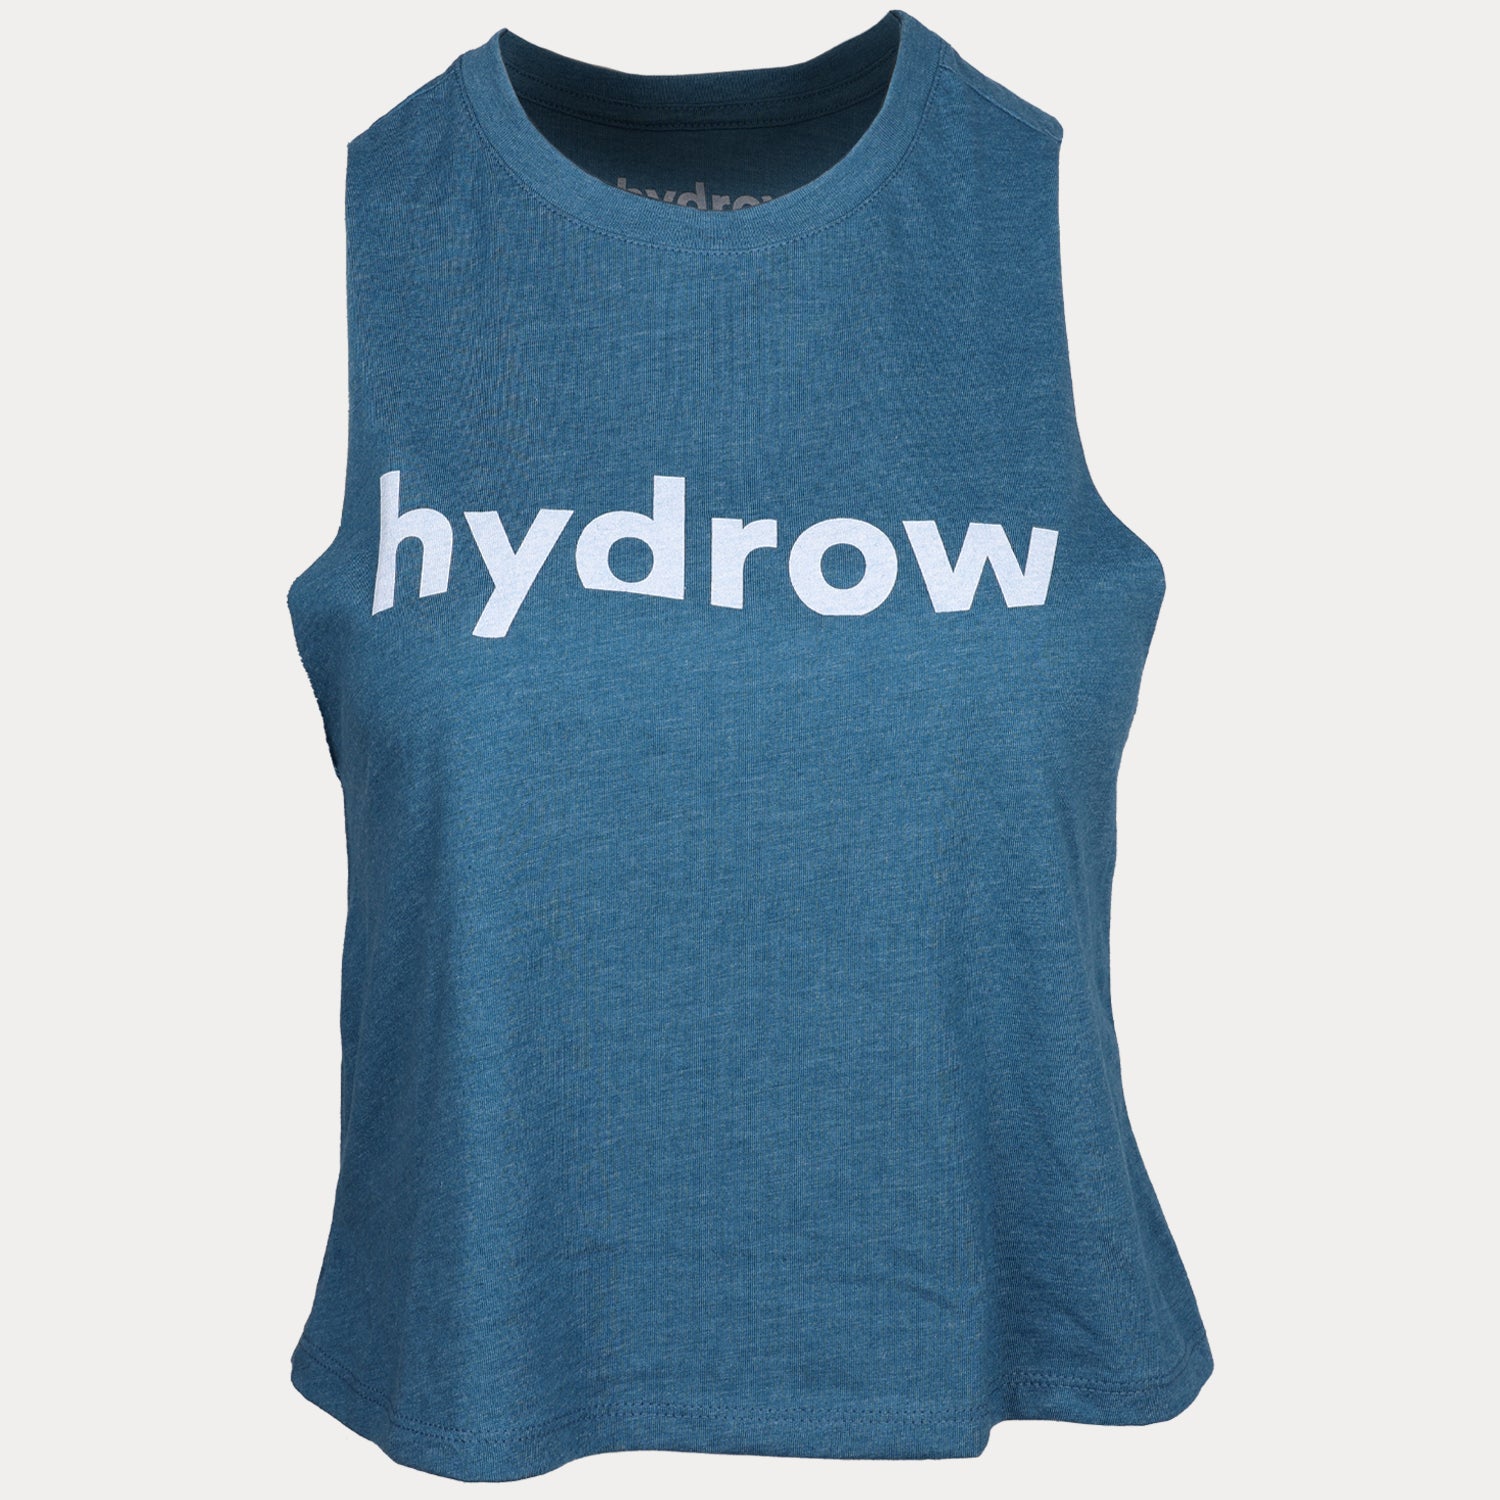 Deep Heather Teal racerback cropped tank with white linear hydrow logo on chest